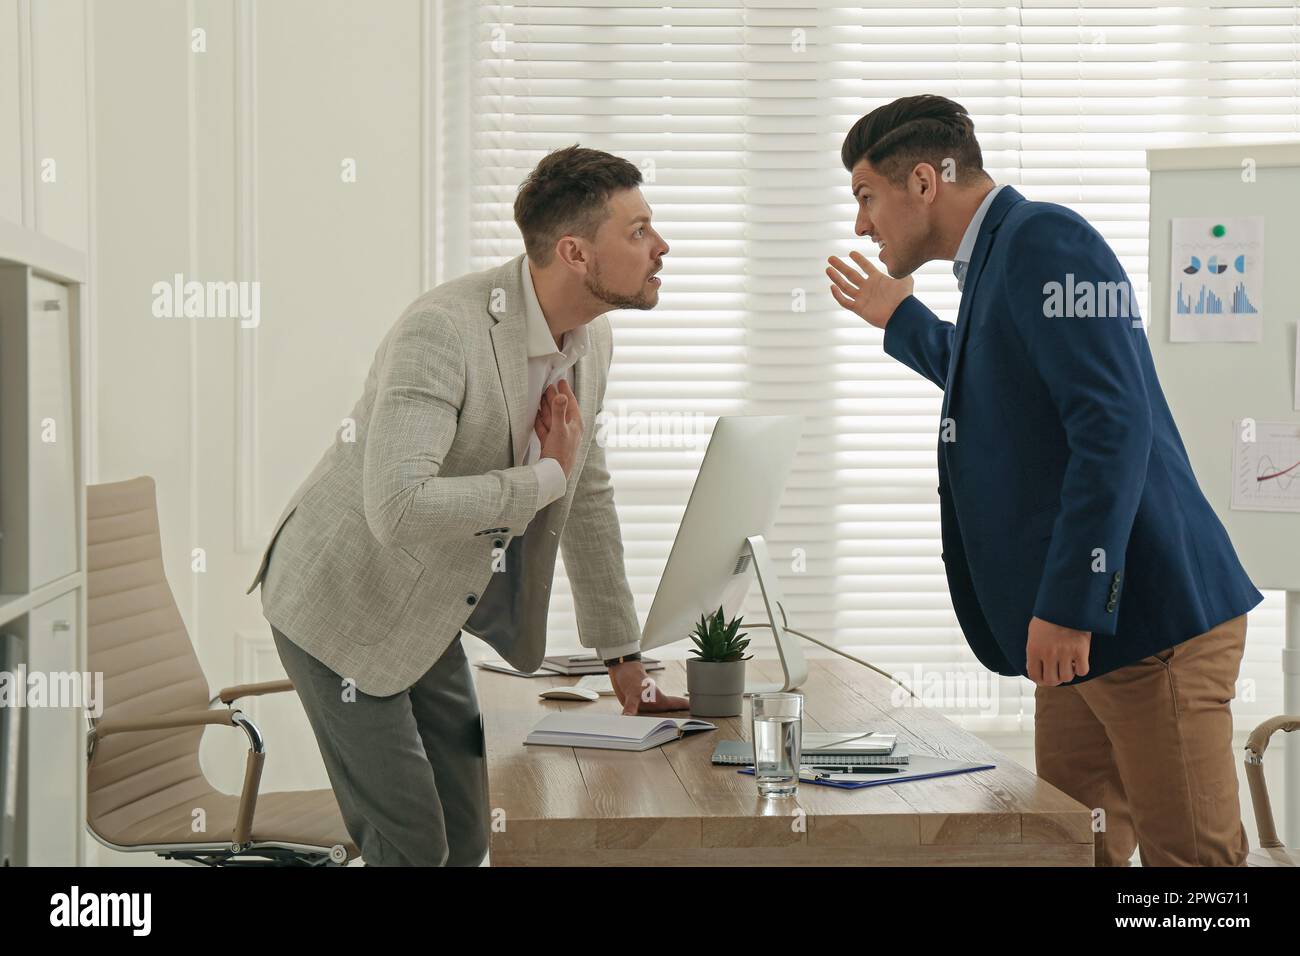 Colleagues fighting at table in office. Workplace conflict Stock Photo